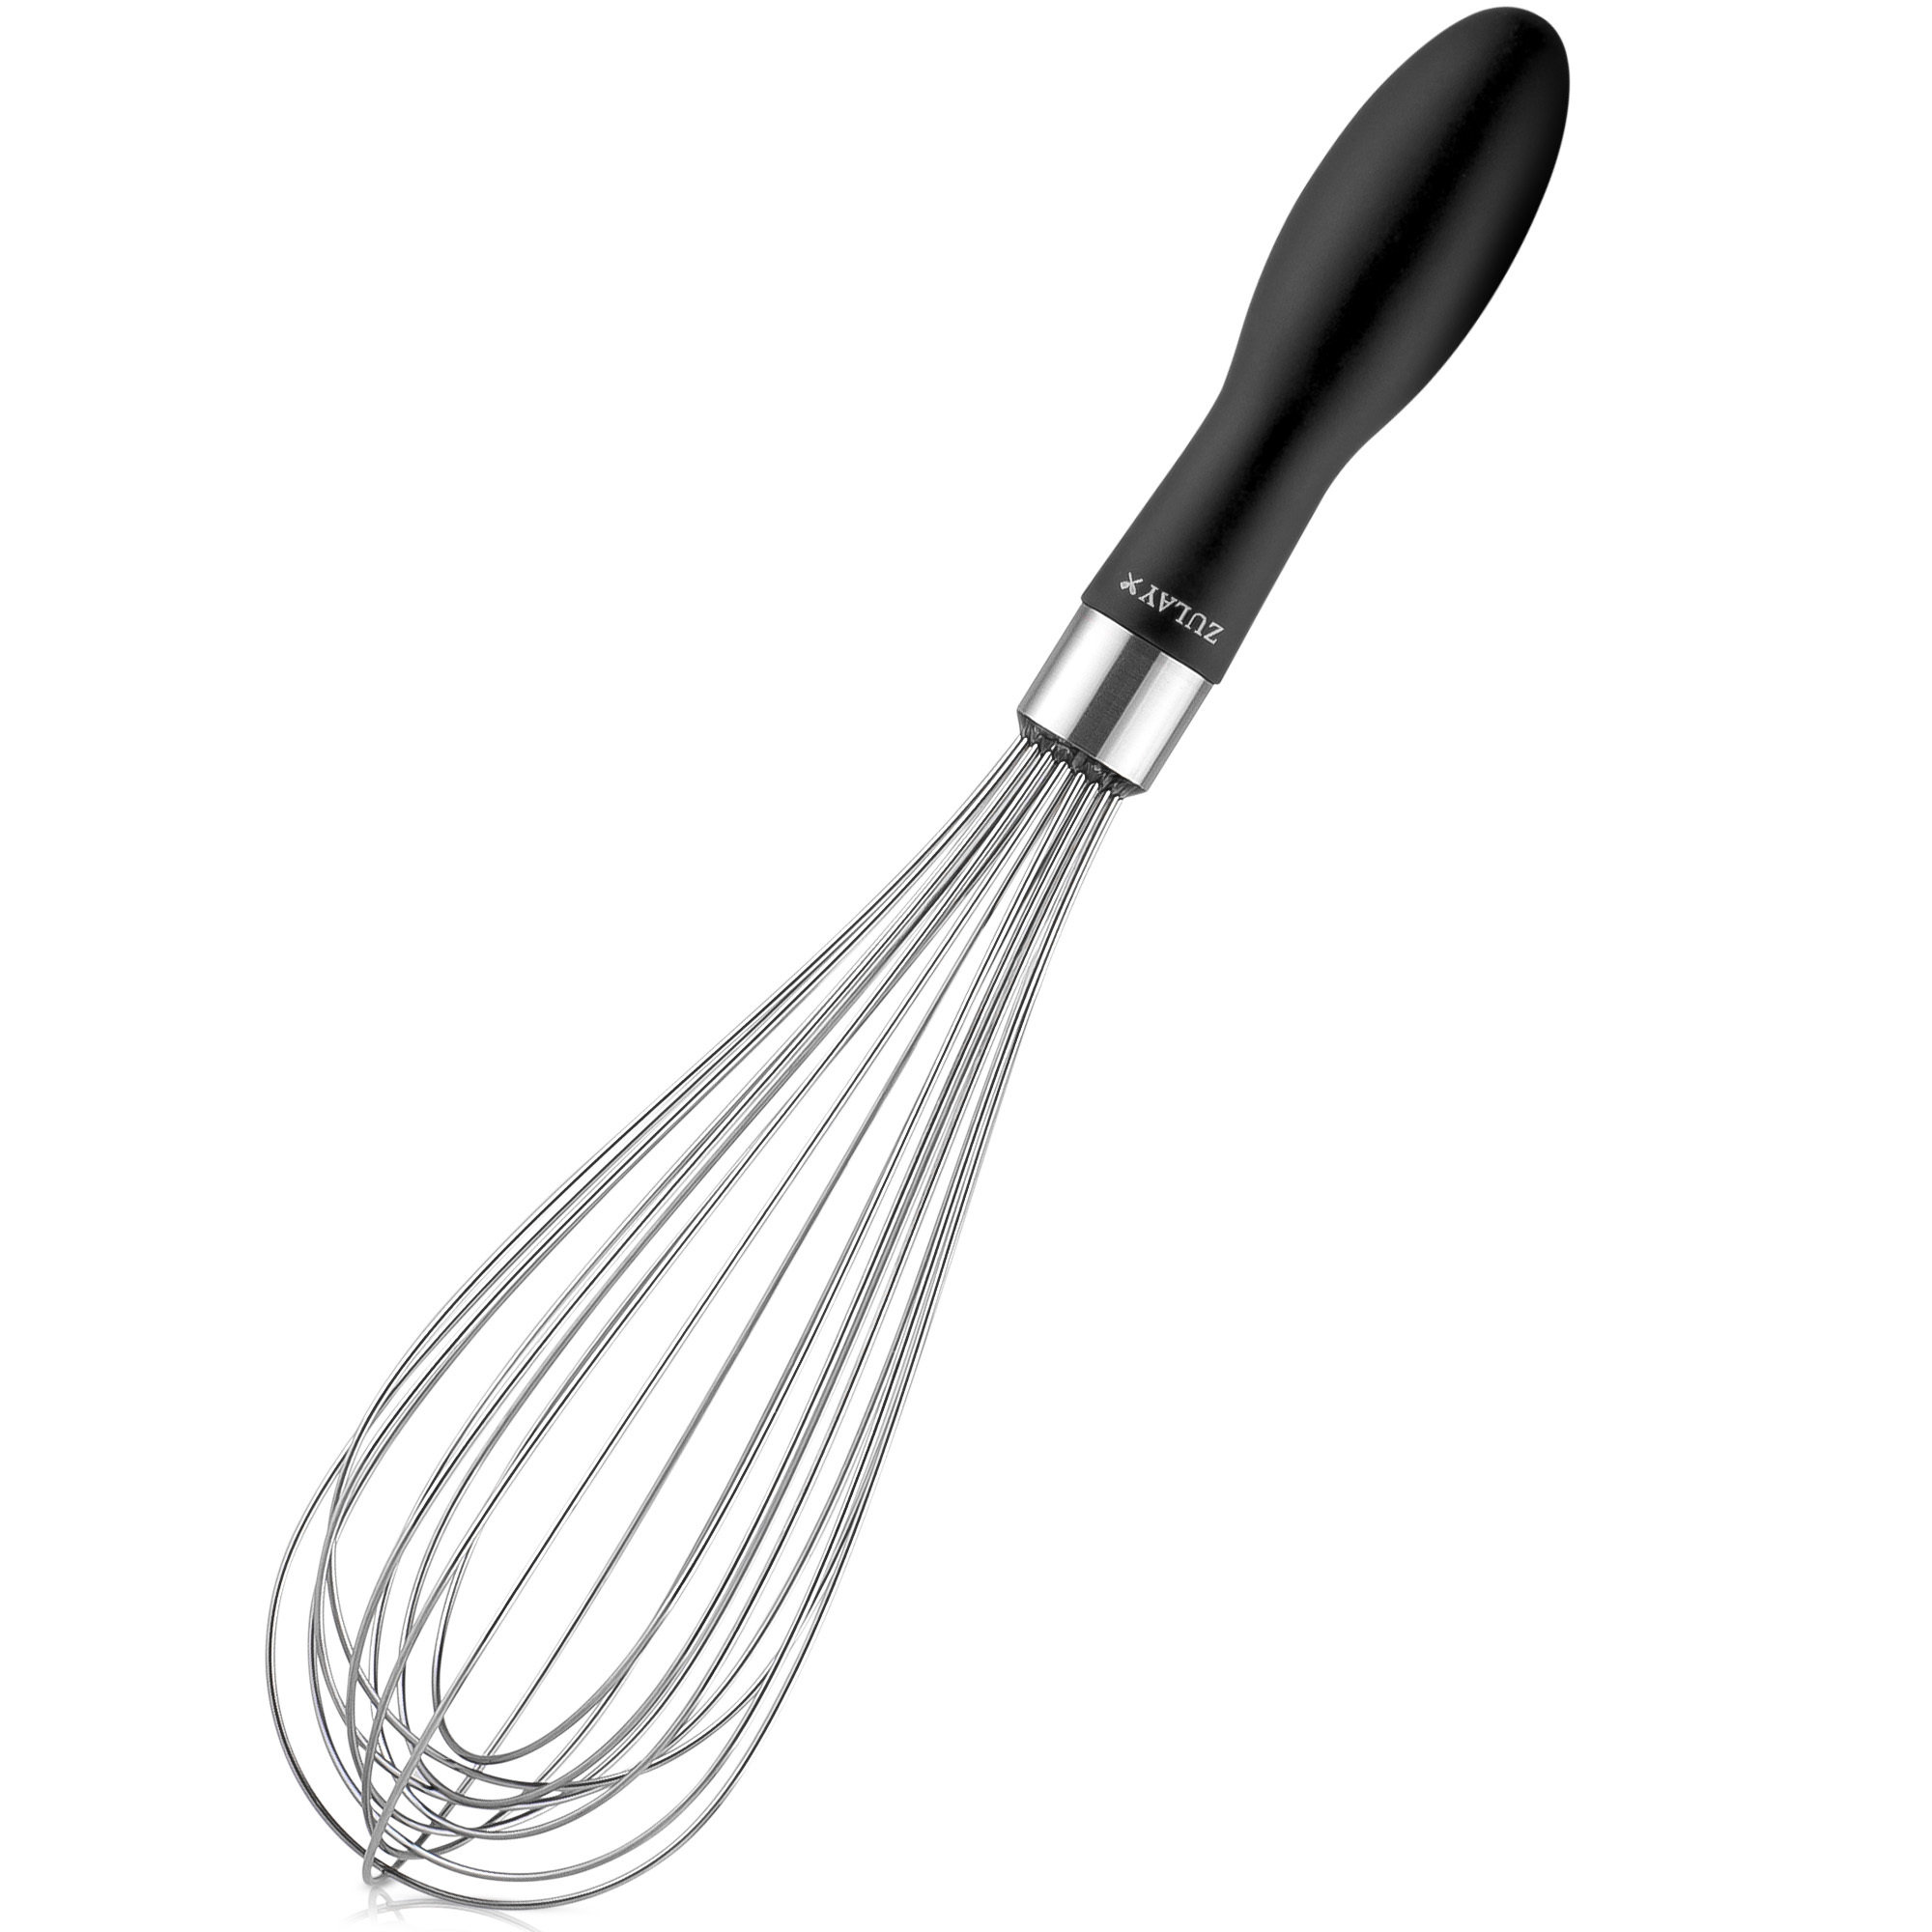 Whisk Commercial Whisks Stainless Steel & Silicone Non-Stick